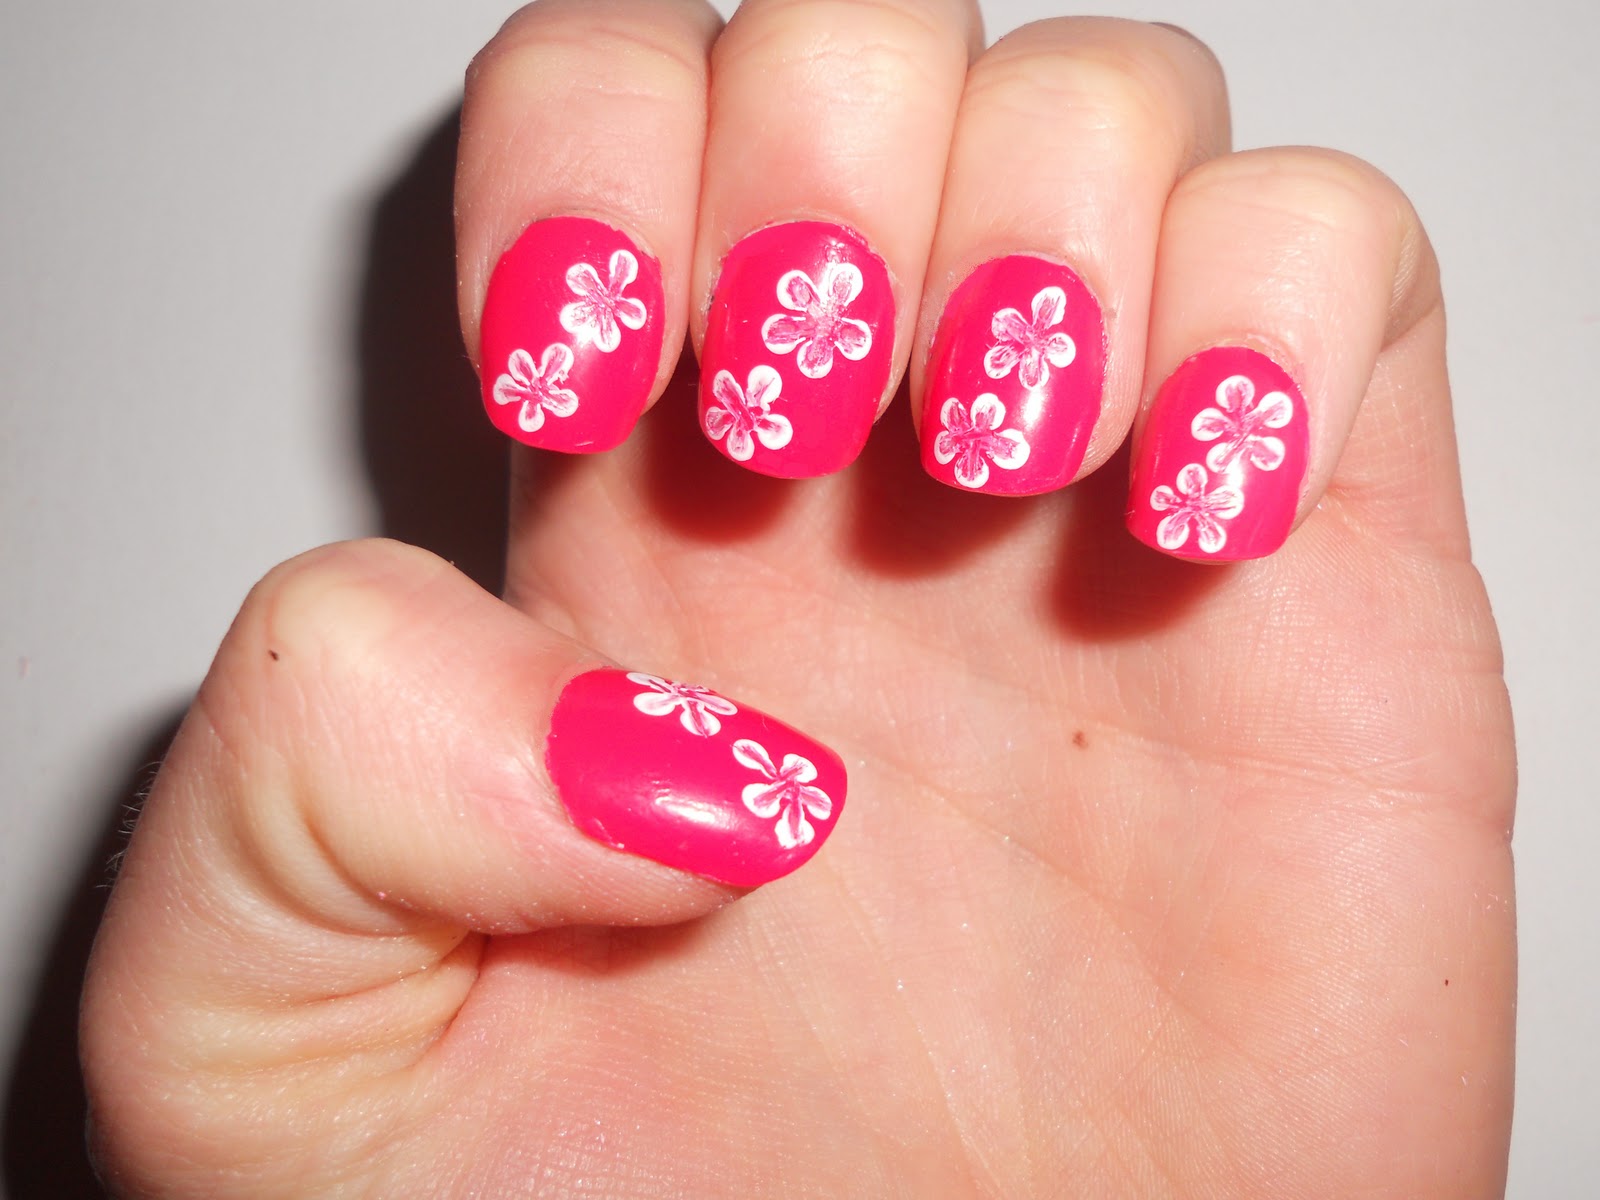 2. Easy Nail Art Designs - wide 9